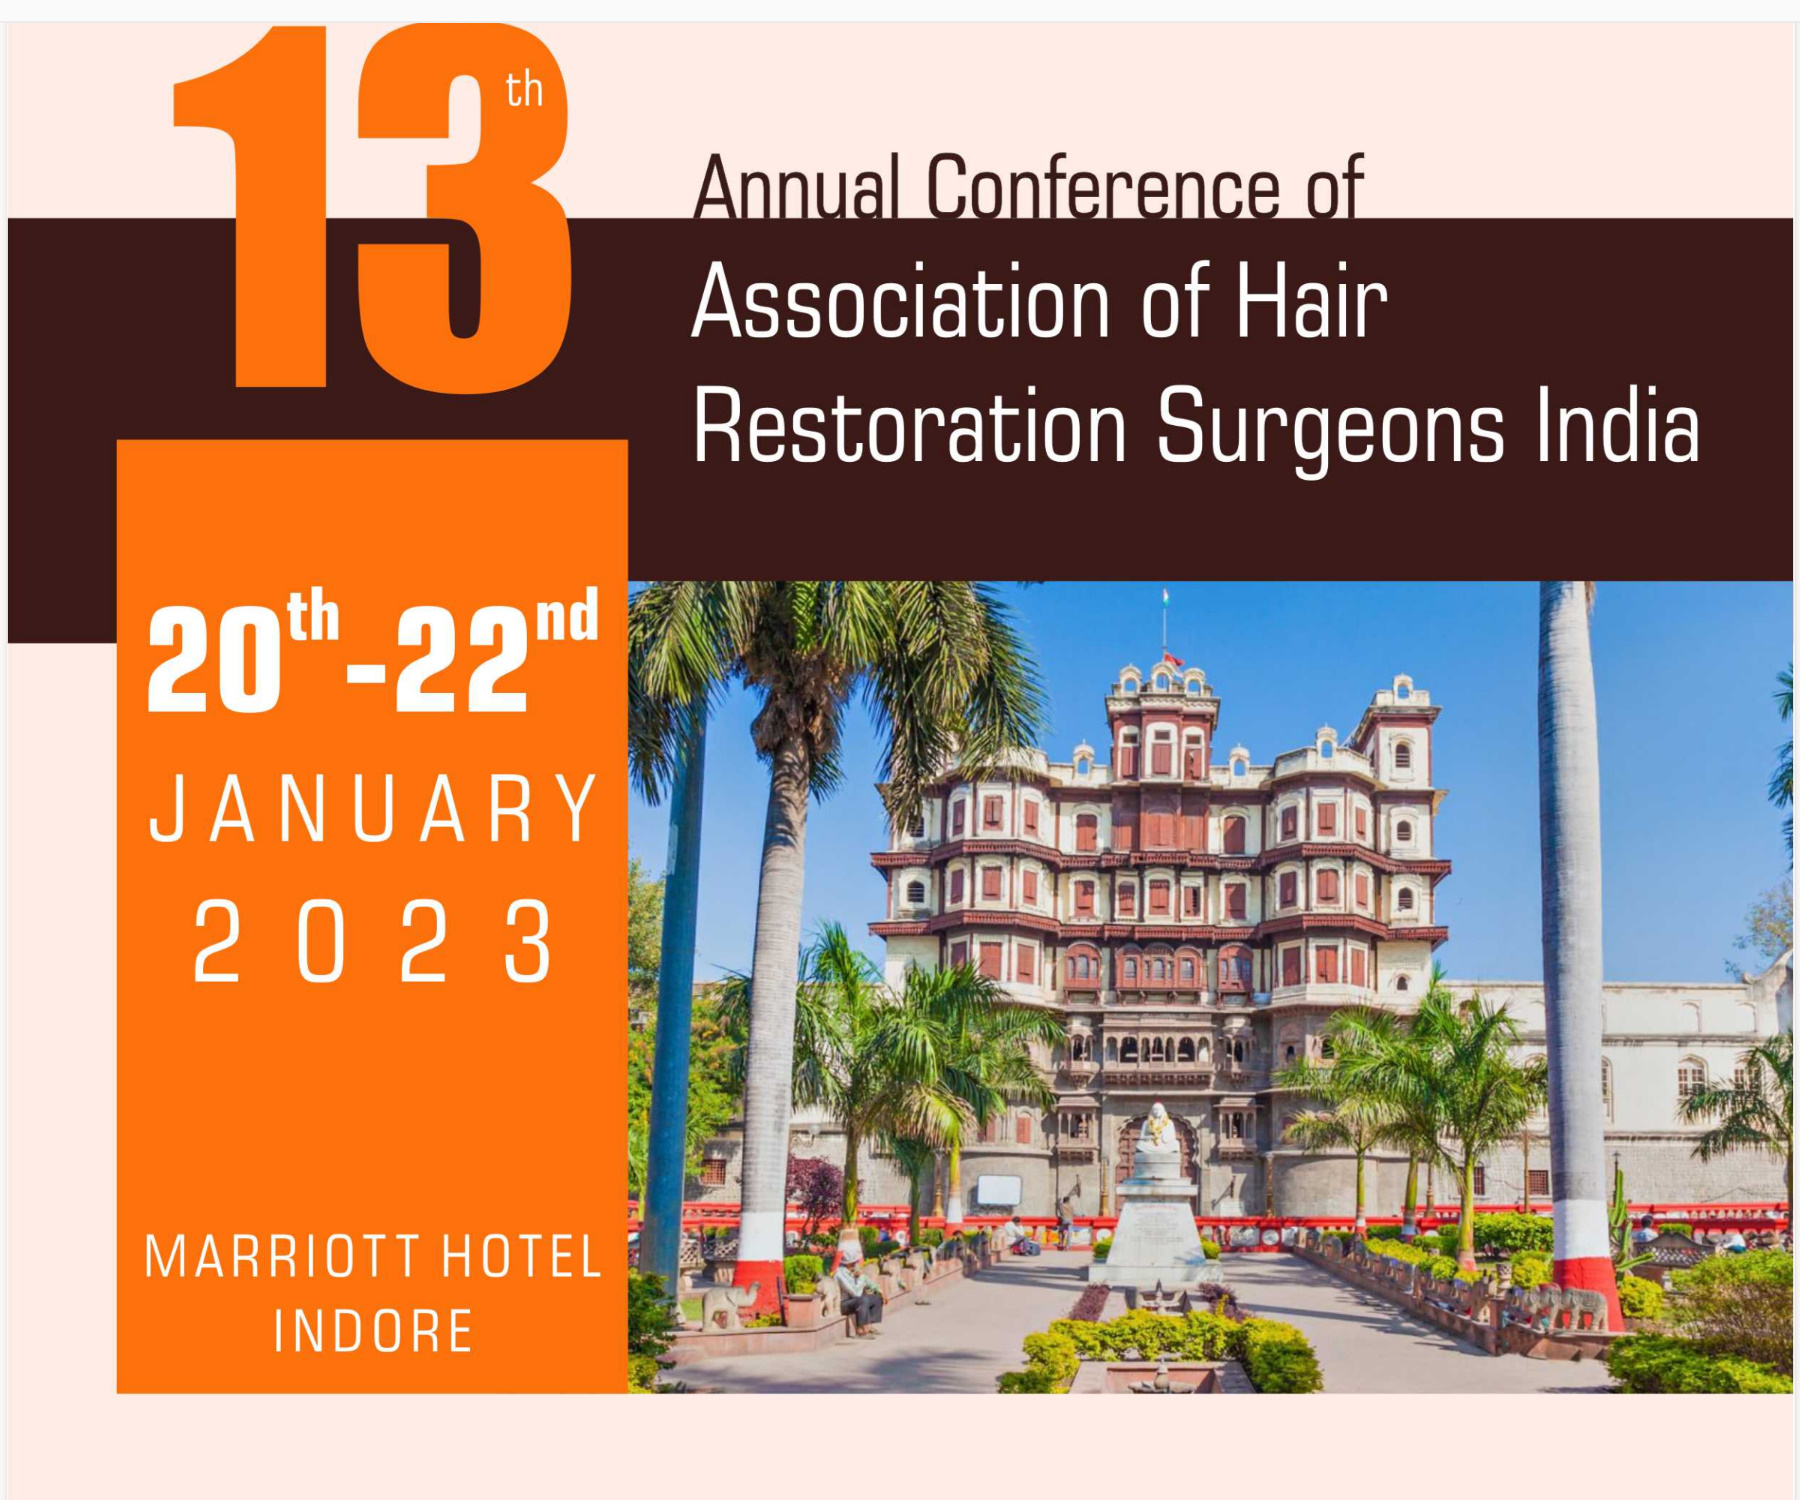 Association of Hair Restoration Surgeons India 13th Annual Conference 2023